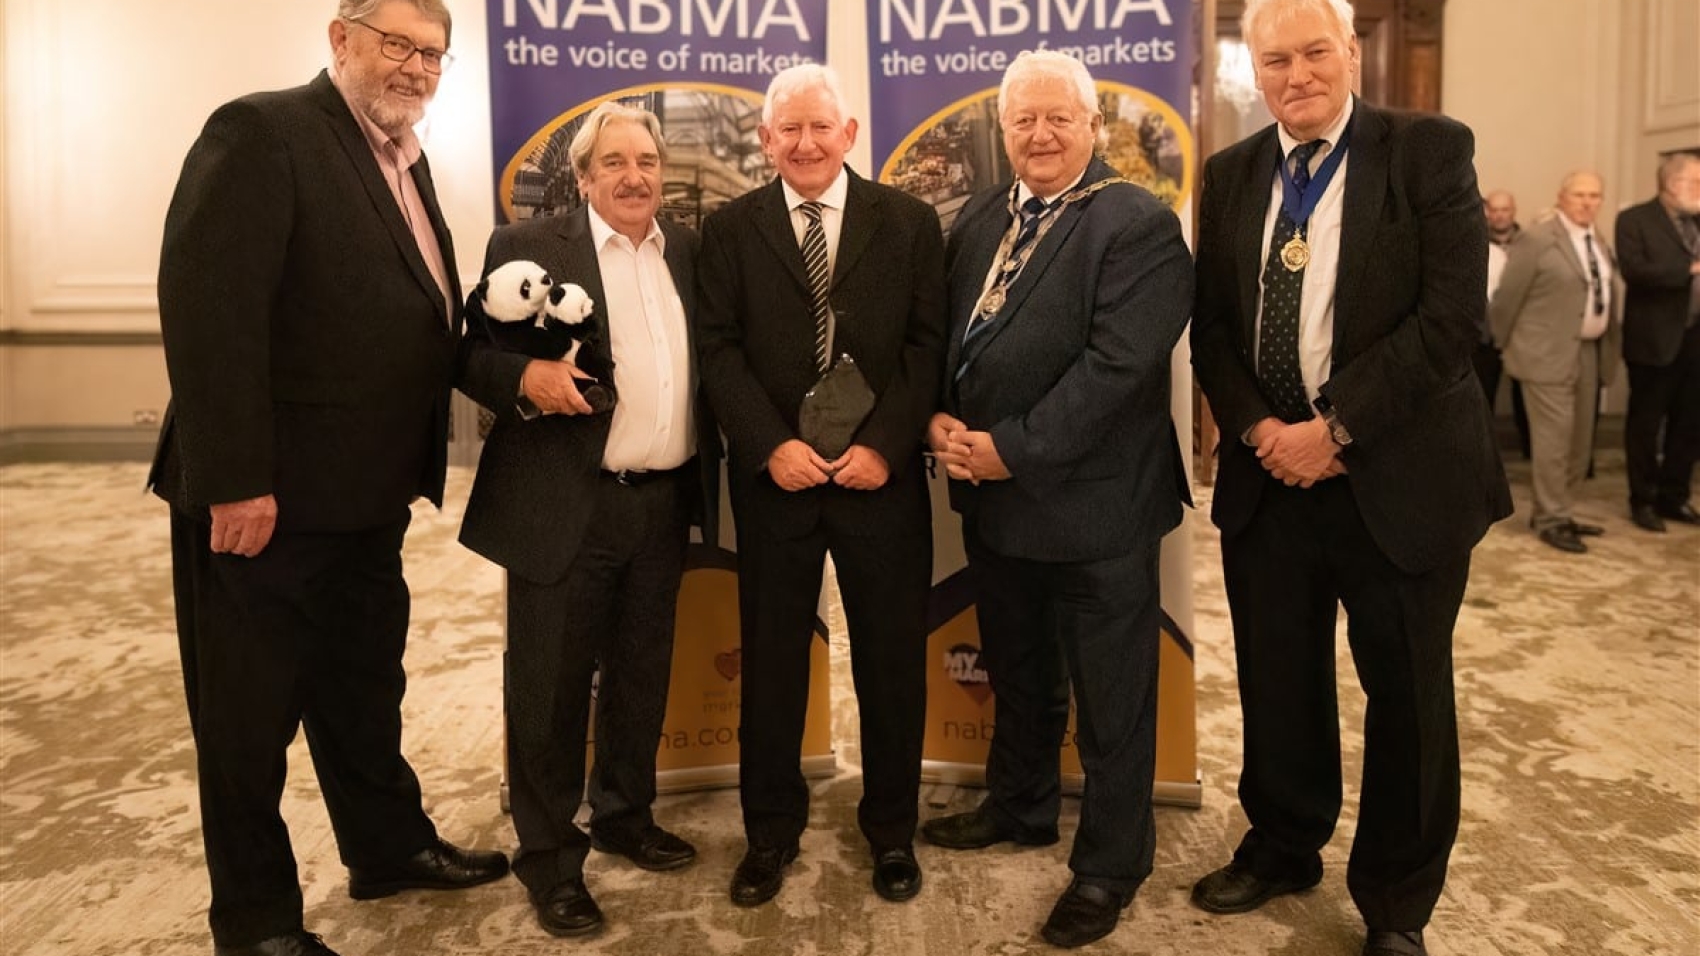 NABMA Conference Oct 2022 Award Winners-16